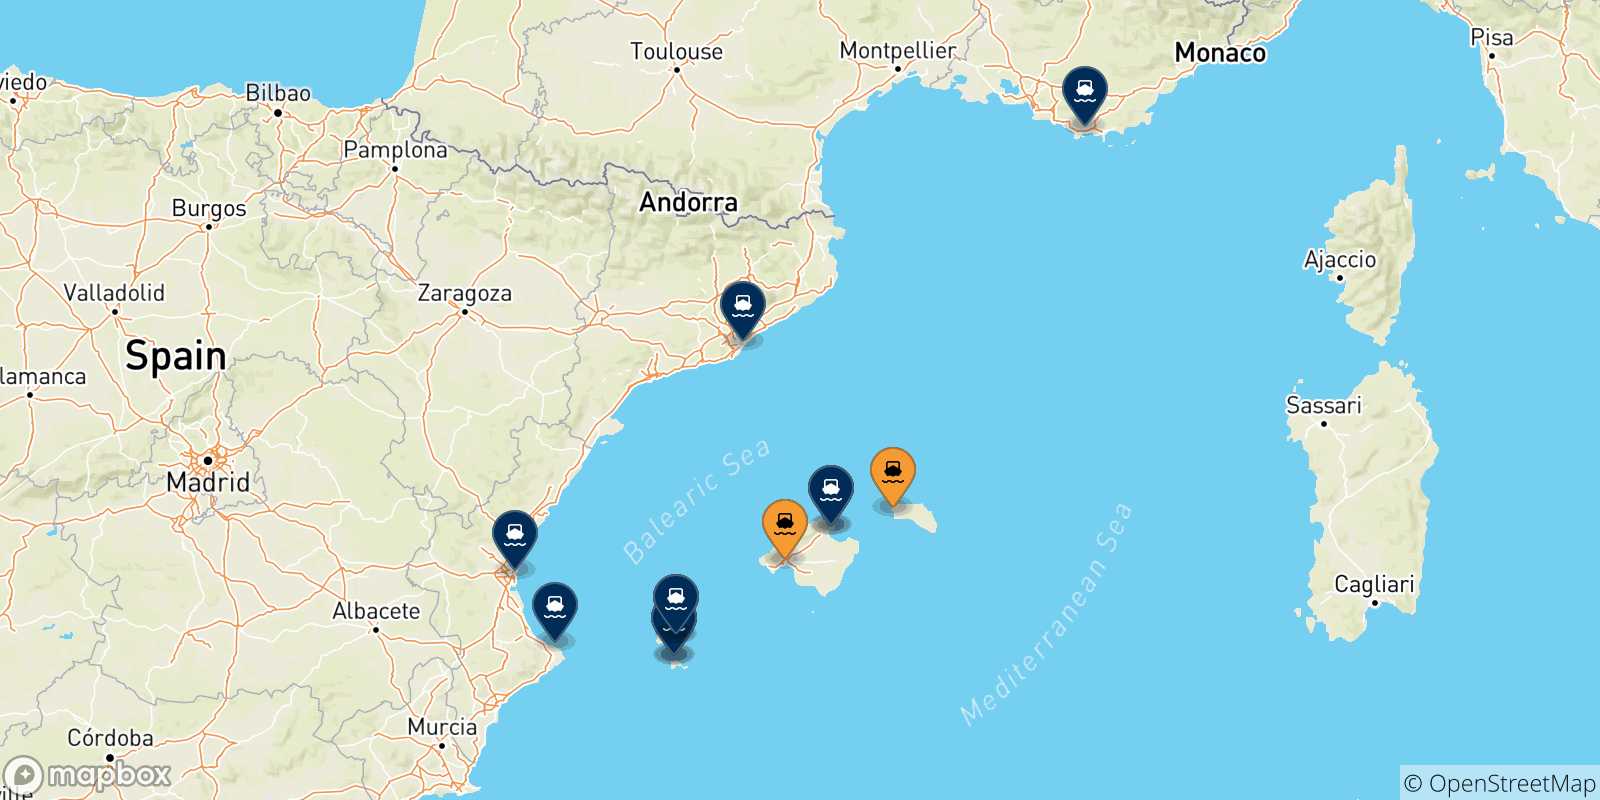 Map of the destinations reachable from the Balearic Islands